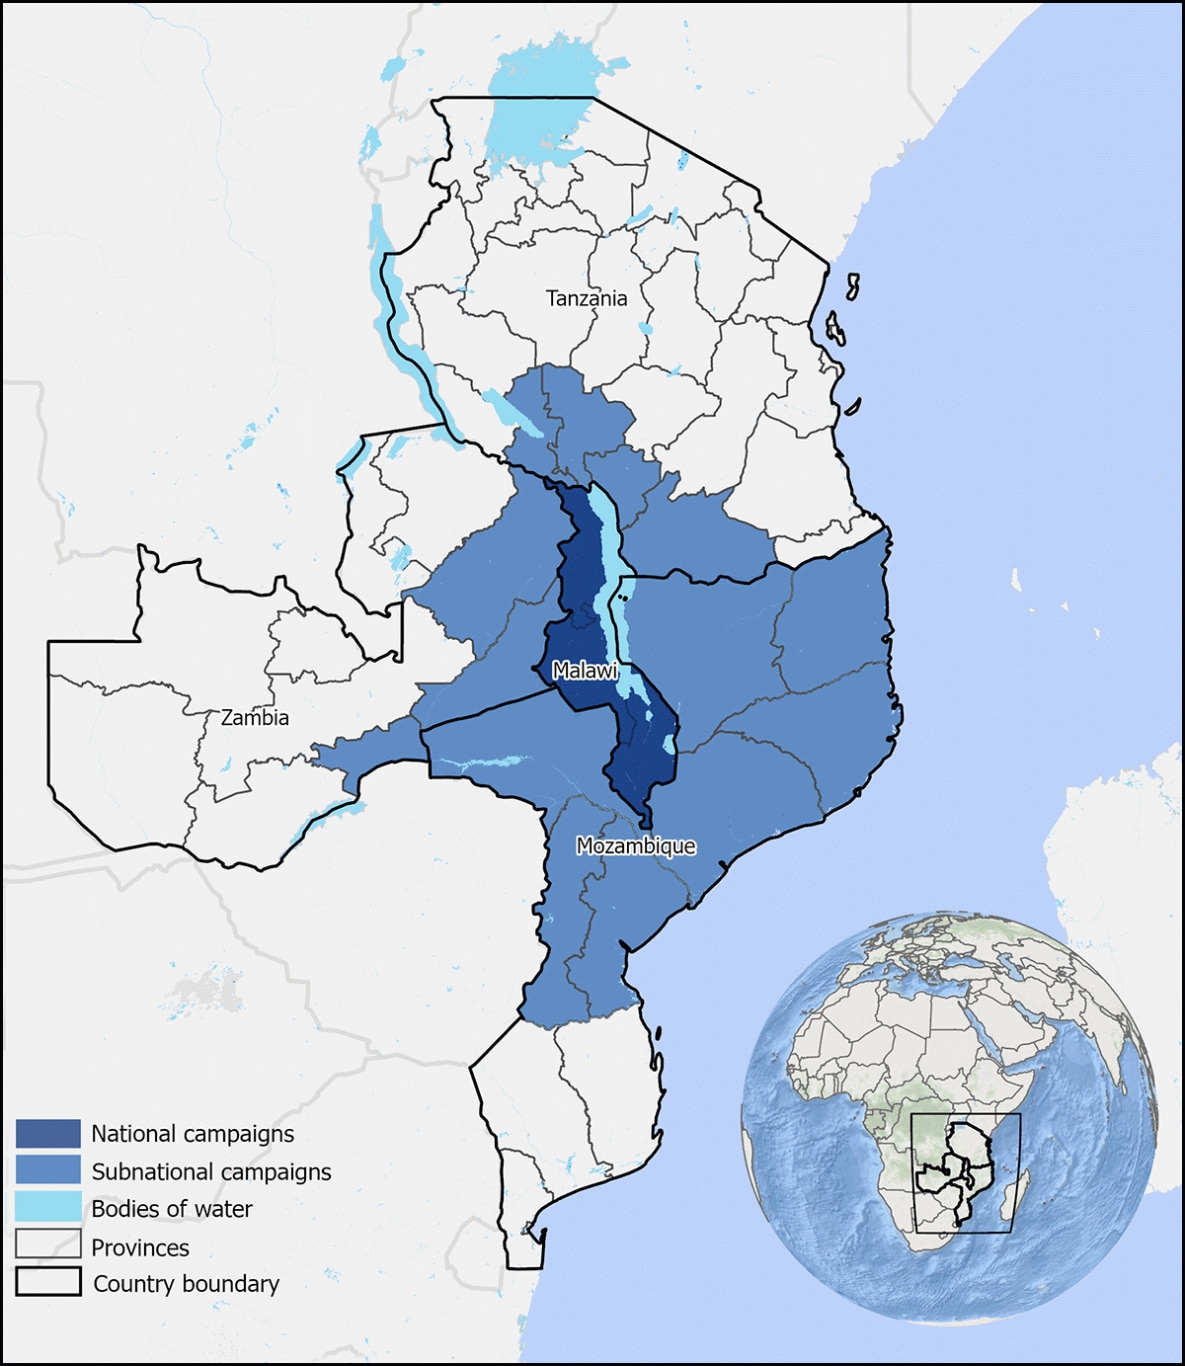 Figure is a map of Malawi and its surrounding countries (Mozambique, Tanzania, and Zambia) showing where national and subnational campaigns took place.